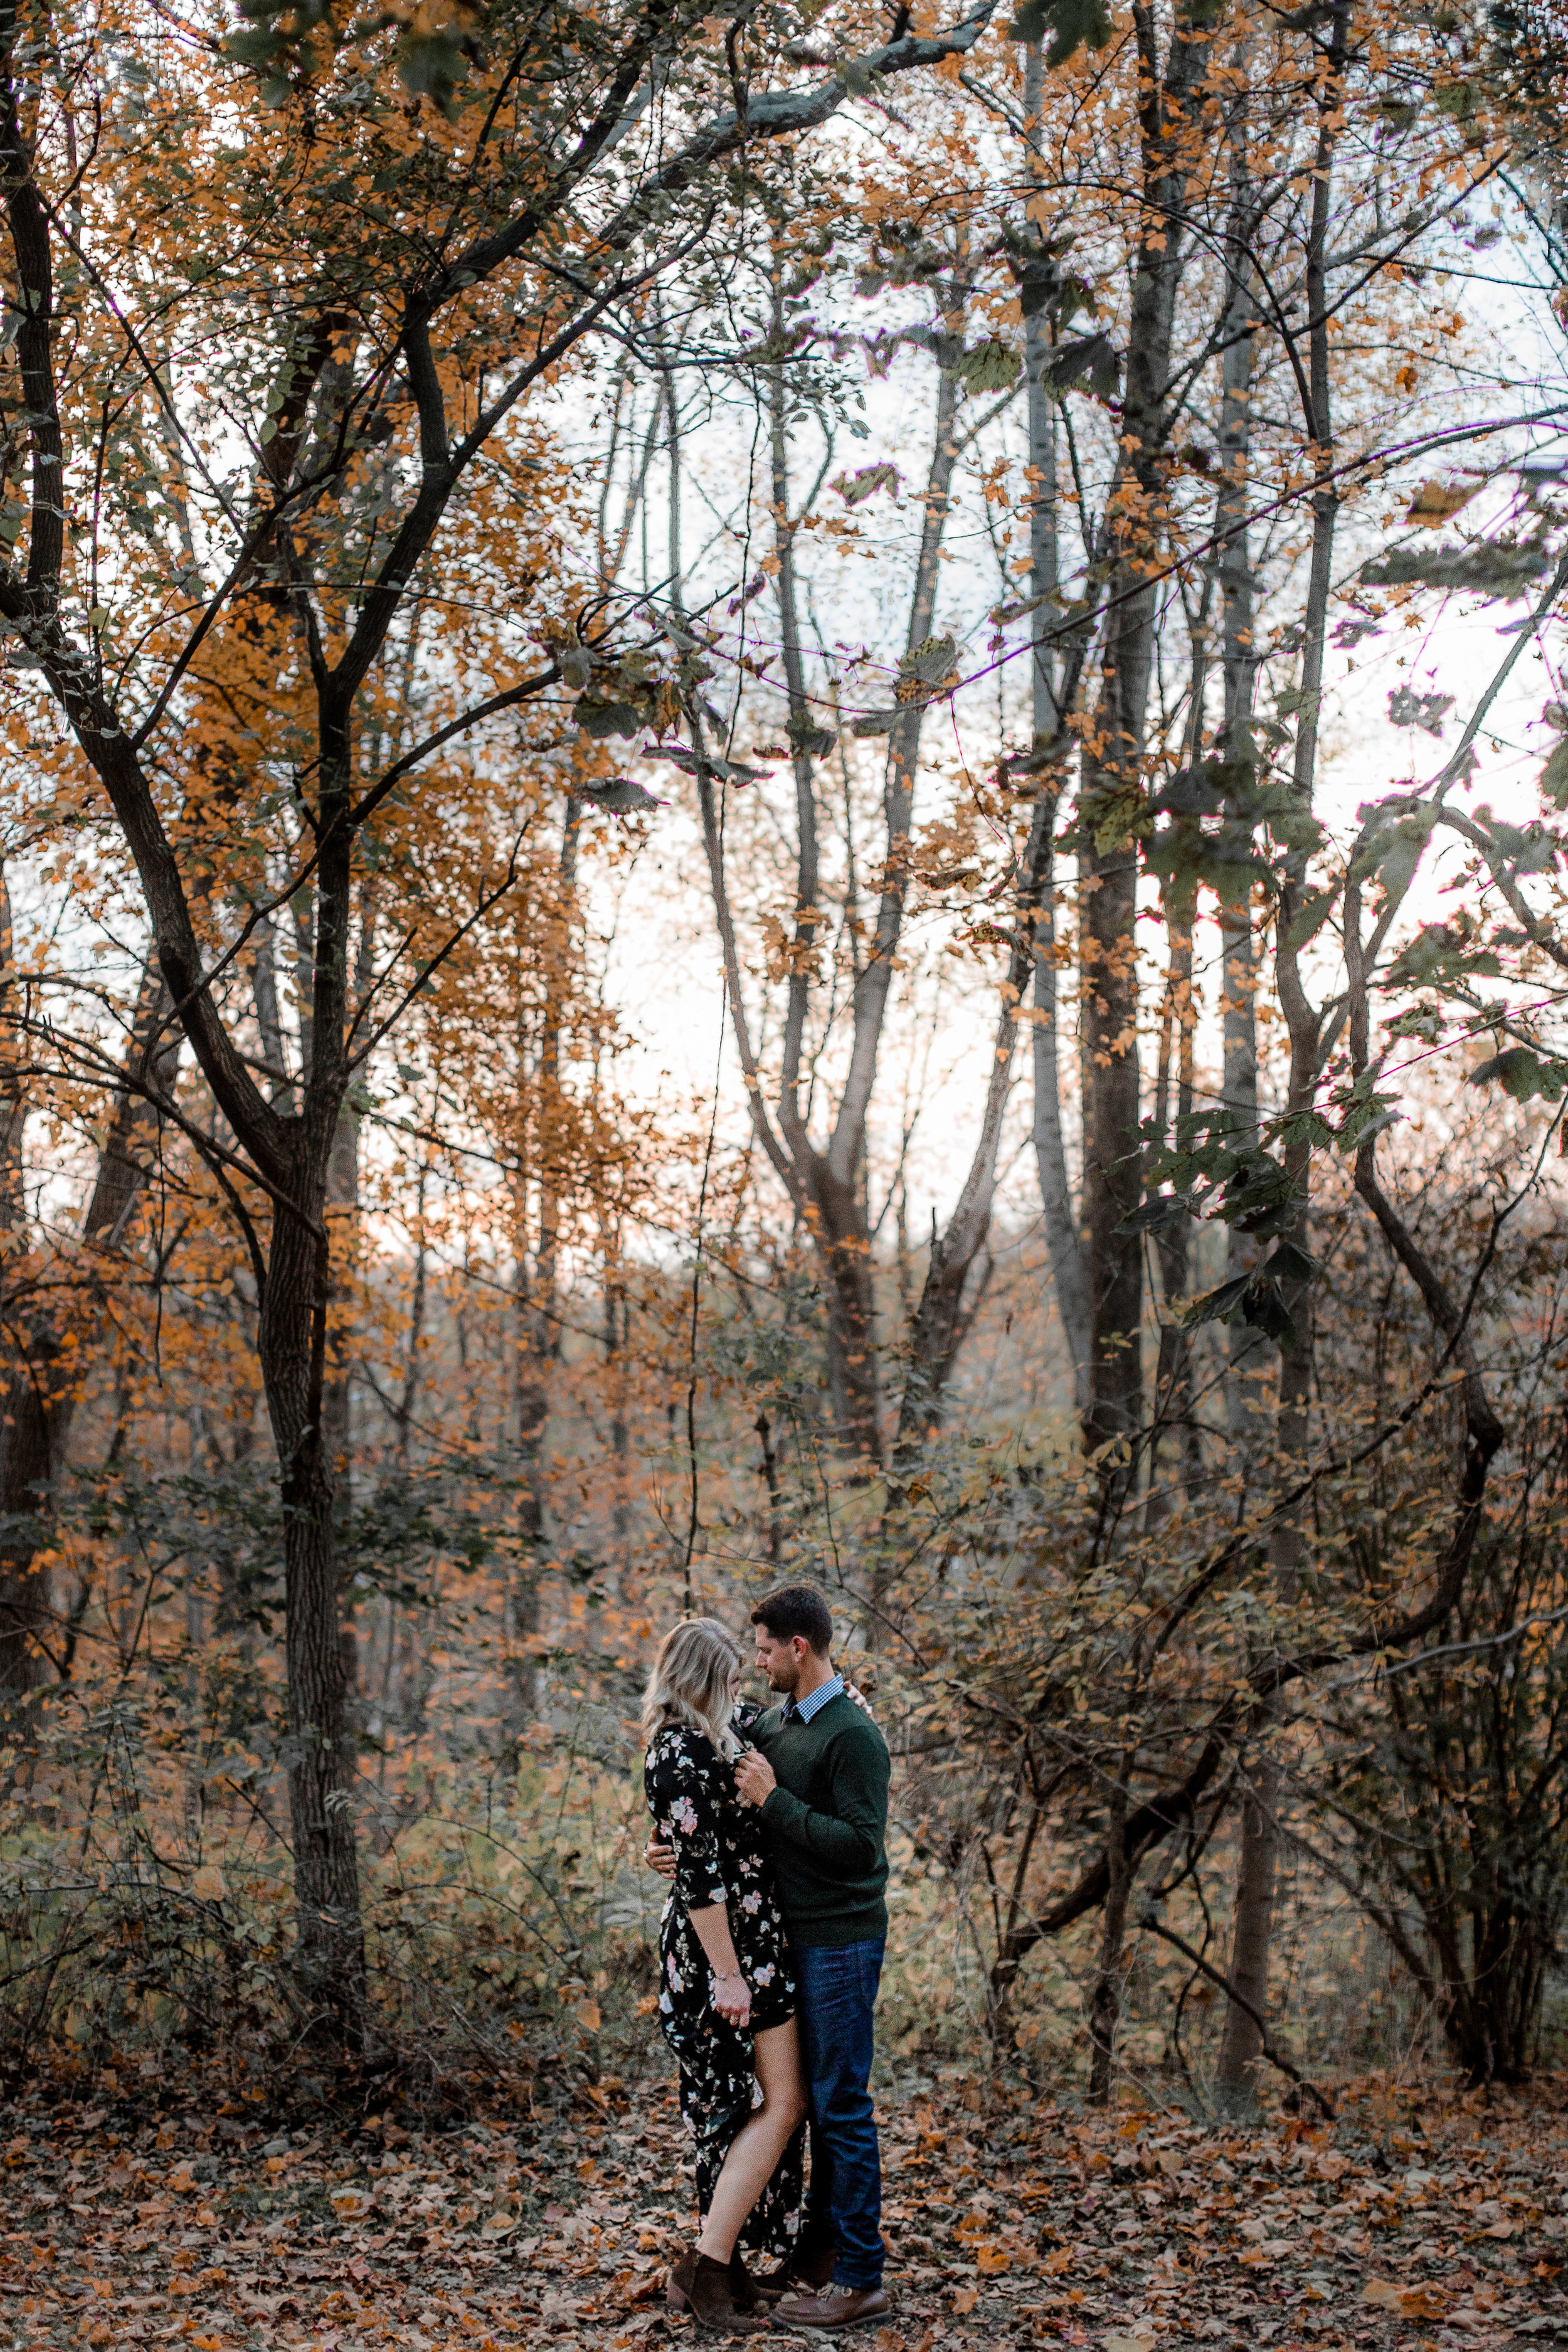 nicole-daacke-photography-carefree-bohemian-lancaster-pa-pennsylvania-engagement-photos-engagement-session-golden-sunset-adventure-session-in-lancaster-pa-lancaster-pa-outdoor-wedding-photographer-60.jpg